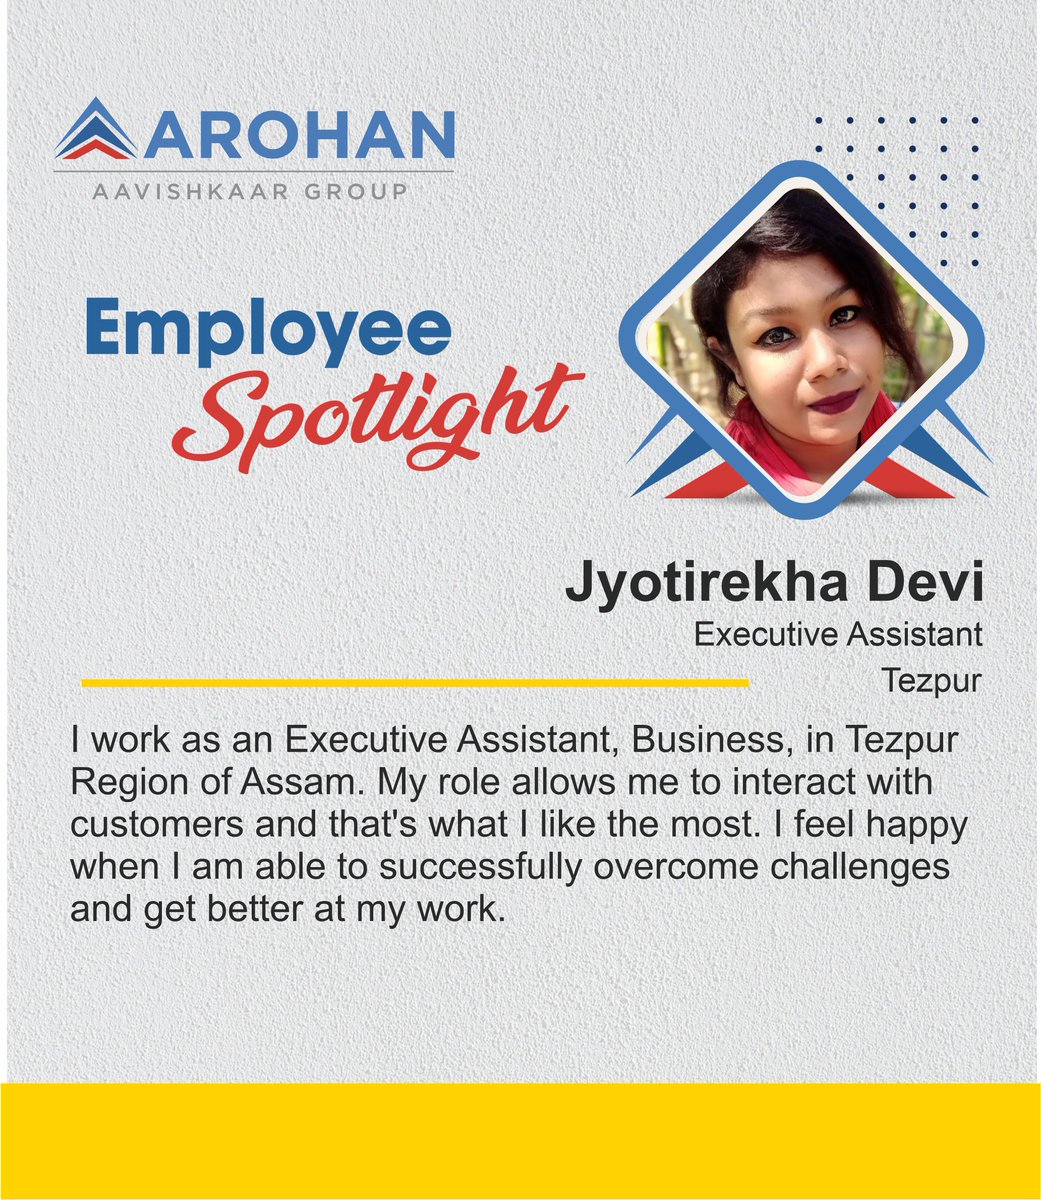 Read what Jyotirekha, an #Arohanite from Assam, Business team, has to say about his experience with the organisation.
Watch this space to know more about 
#LifeatArohan #ArohanEmployeeSpotlight #GenderDiversity